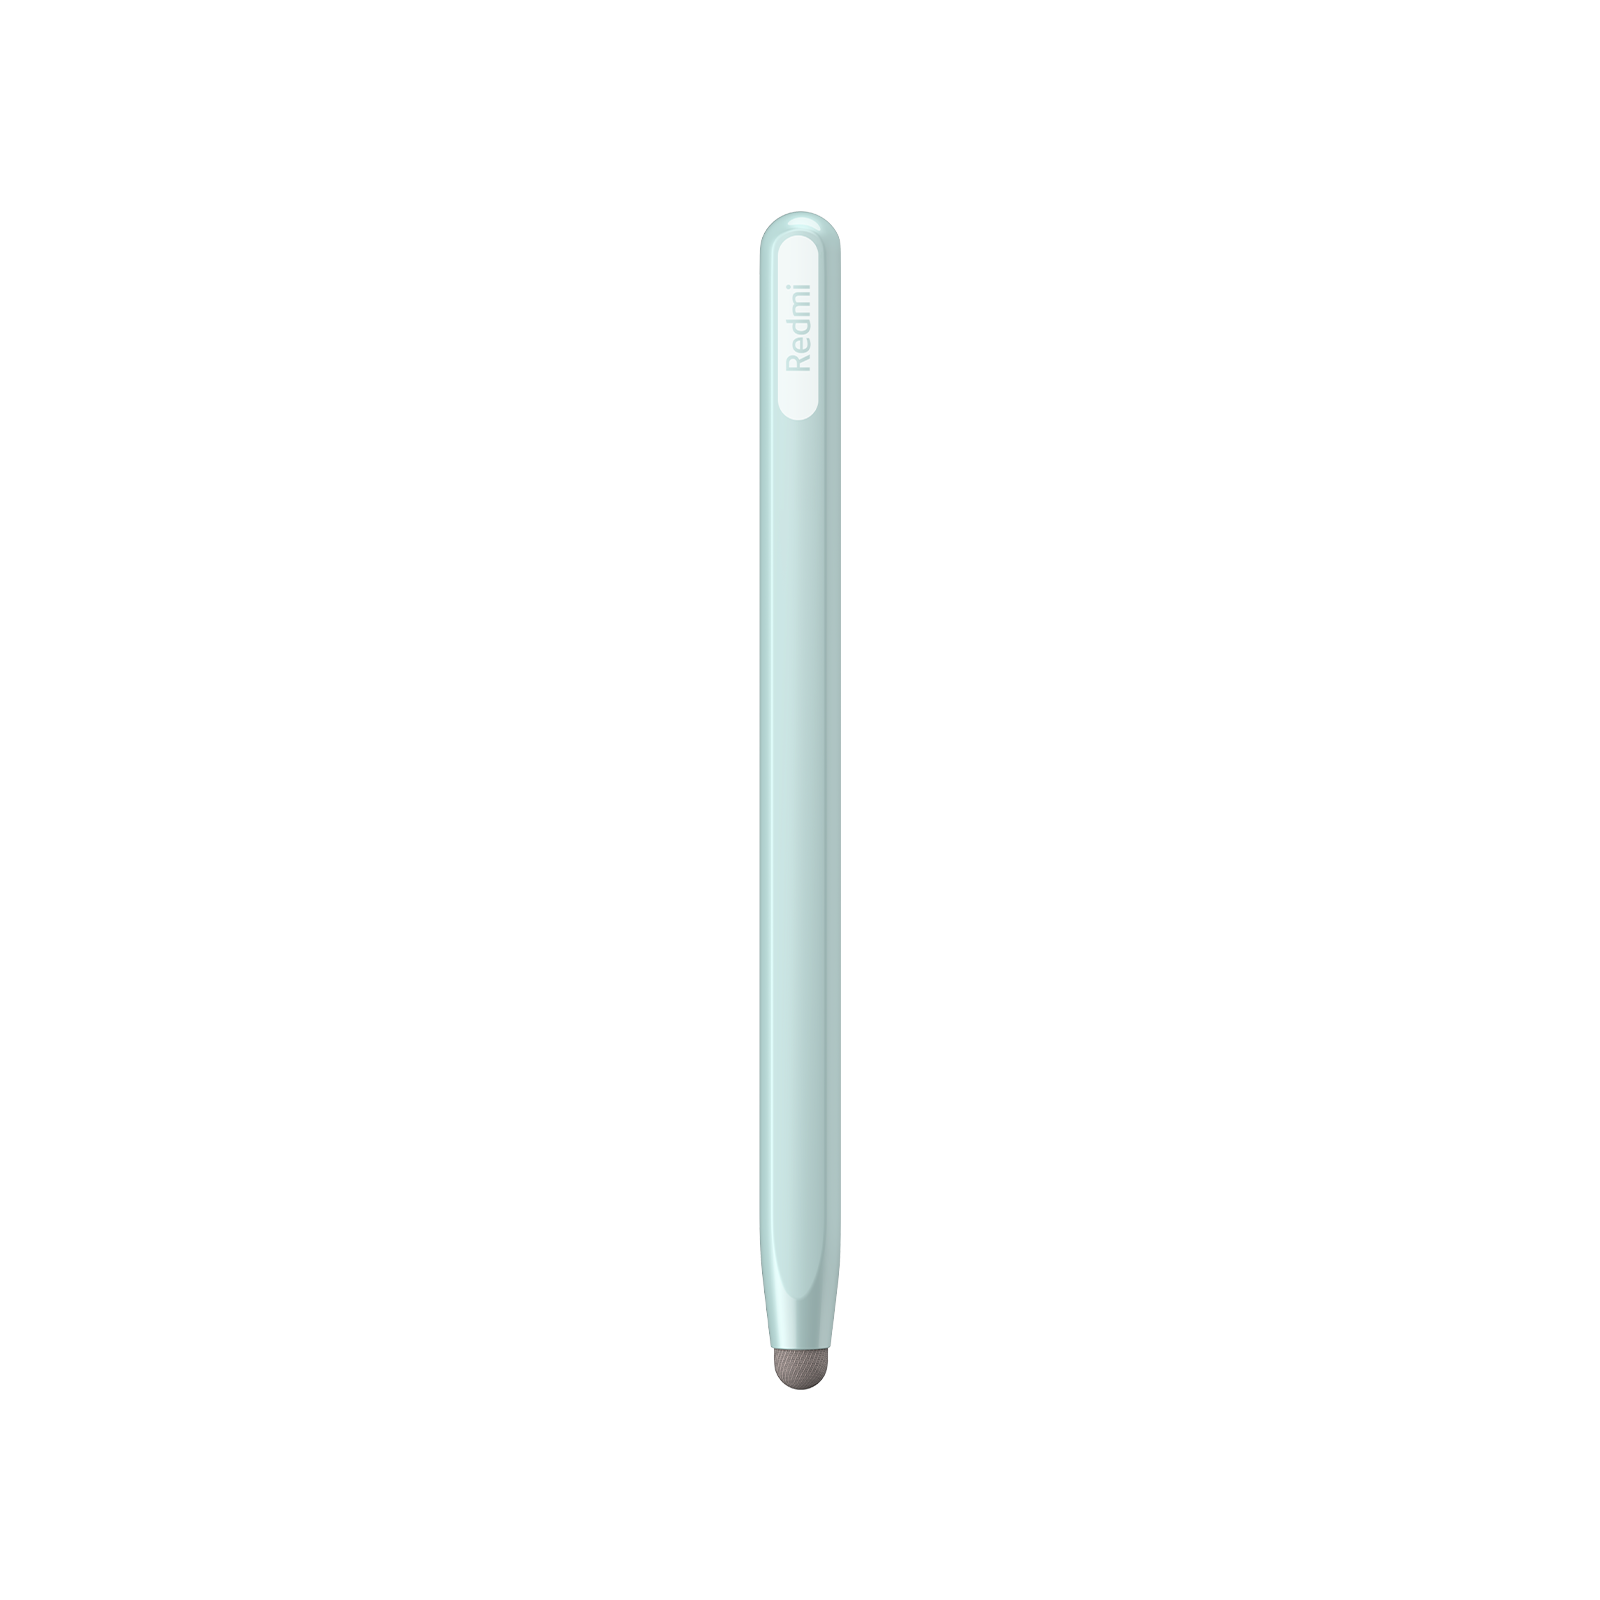 Stylus Pen For Xiaomi RedMi Pad SE 11 2023 Tablet Pen For MiPad 6 Max  14Pad 6 Pro Universal Screen Touch Drawing Pen Pencil